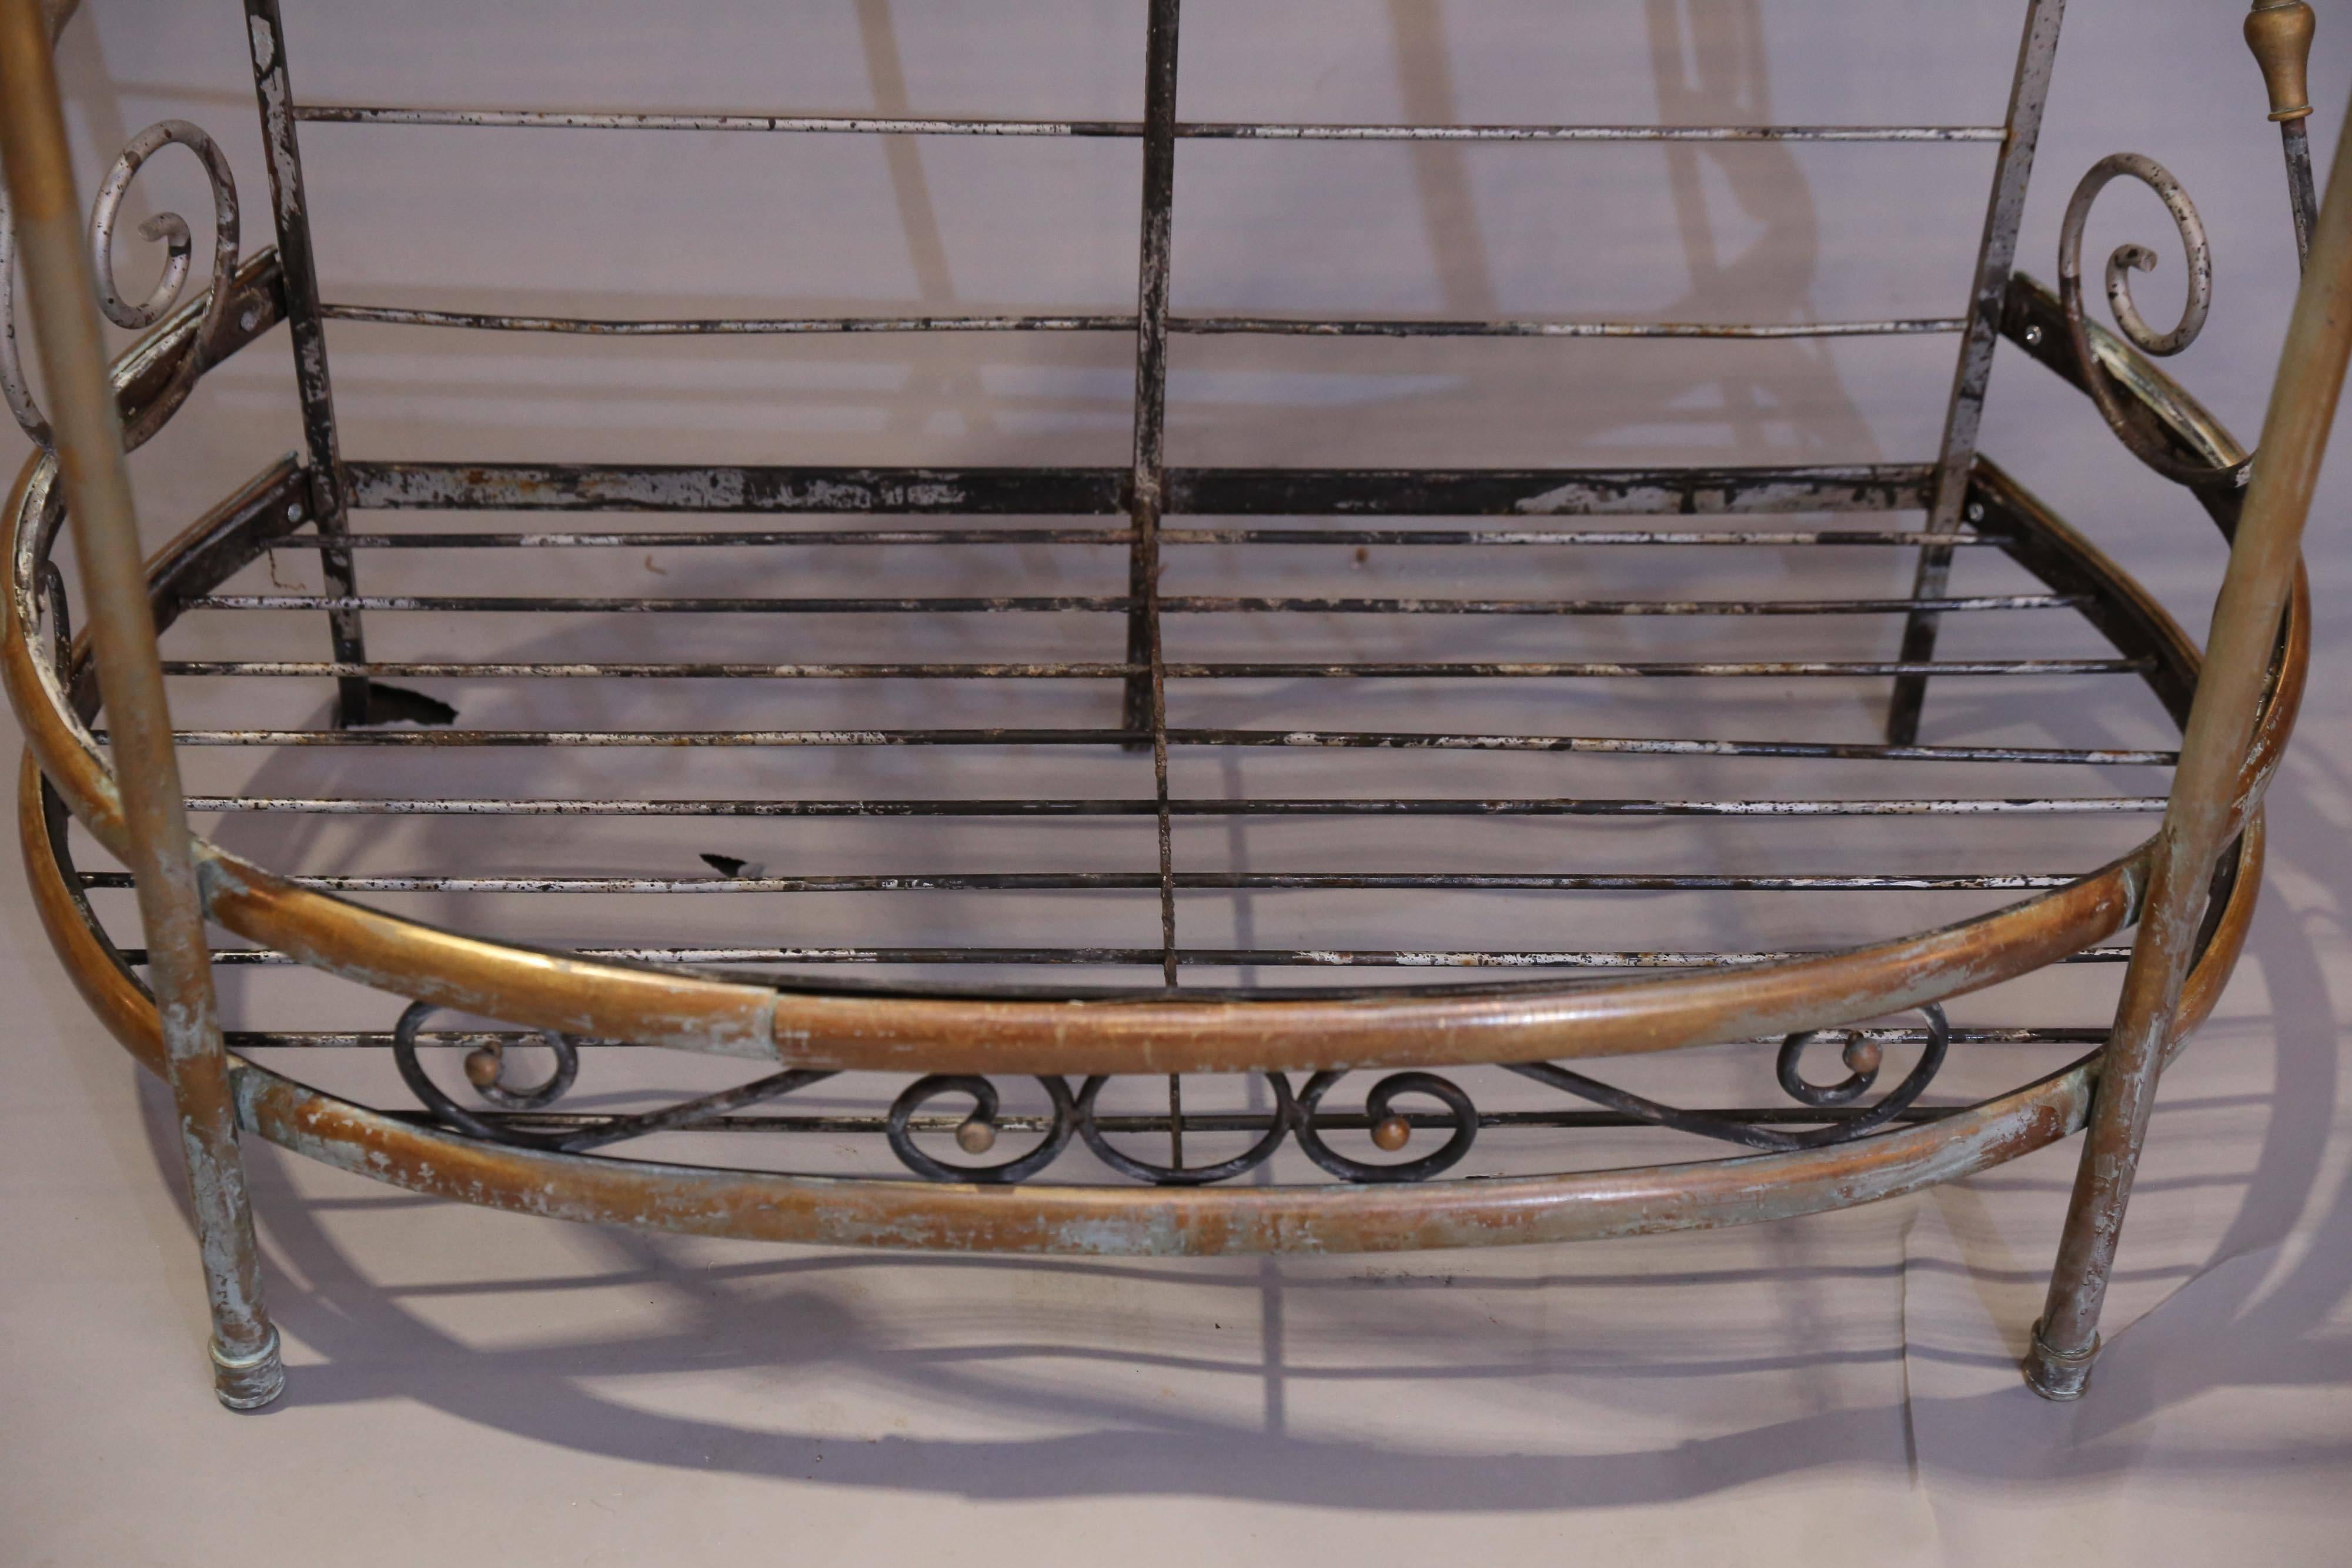 Wrought iron and brass Baker's rack has a curved front with brass fronts and finials to each of three shelves
Shelves are held up with an S-shaped bracket with brass ornamentation.
At the very top of Baker's rack is a wheat sheaf, adding to the